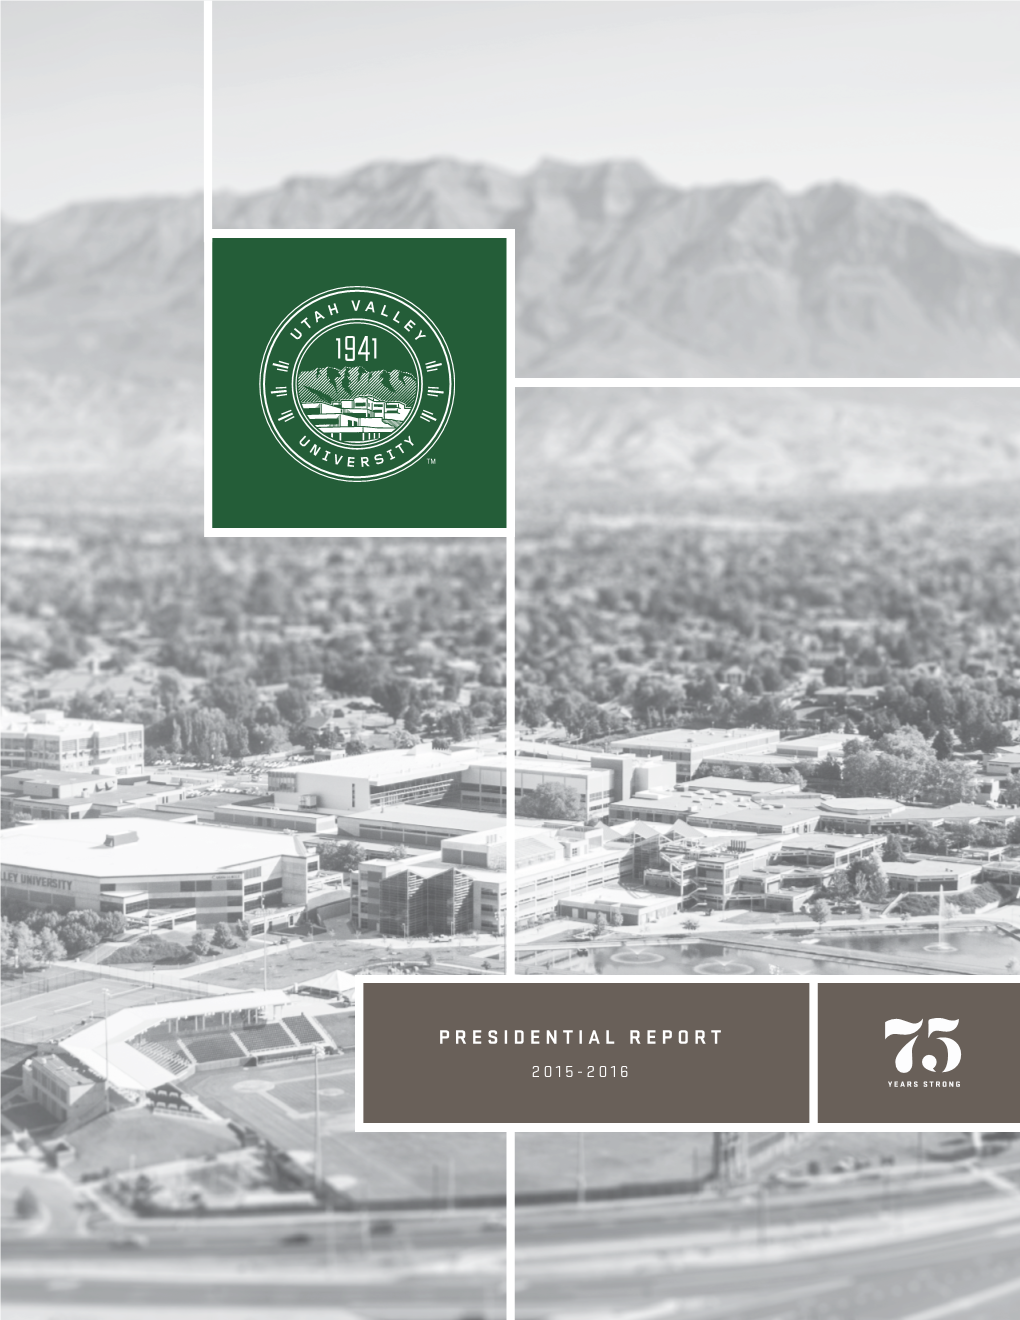 PRESIDENTIAL REPORT 2015-2016 “The Future of UVU Has Never Looked Brighter.” — PRESIDENT MATTHEW S